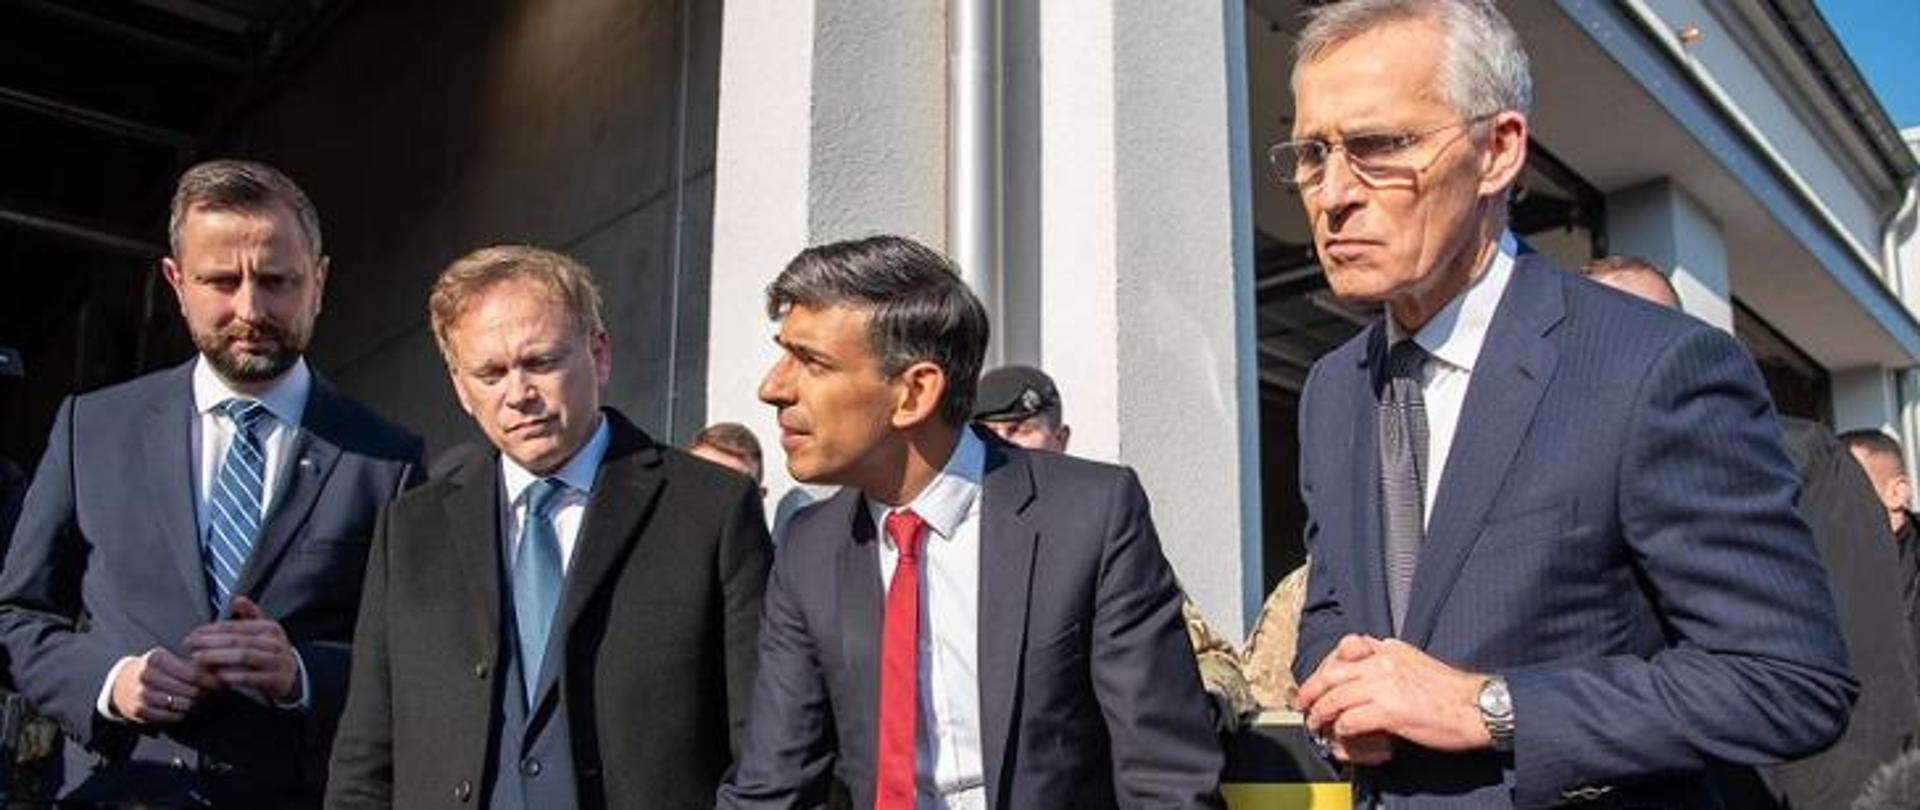 On Tuesday, April 23rd, Prime Minister of the United Kingdom Rishi Sunak, Secretary of State for Defence Grant Shapps and Secretary General of NATO Jens Stoltenberg visited the 1st Warsaw Armoured Brigade.